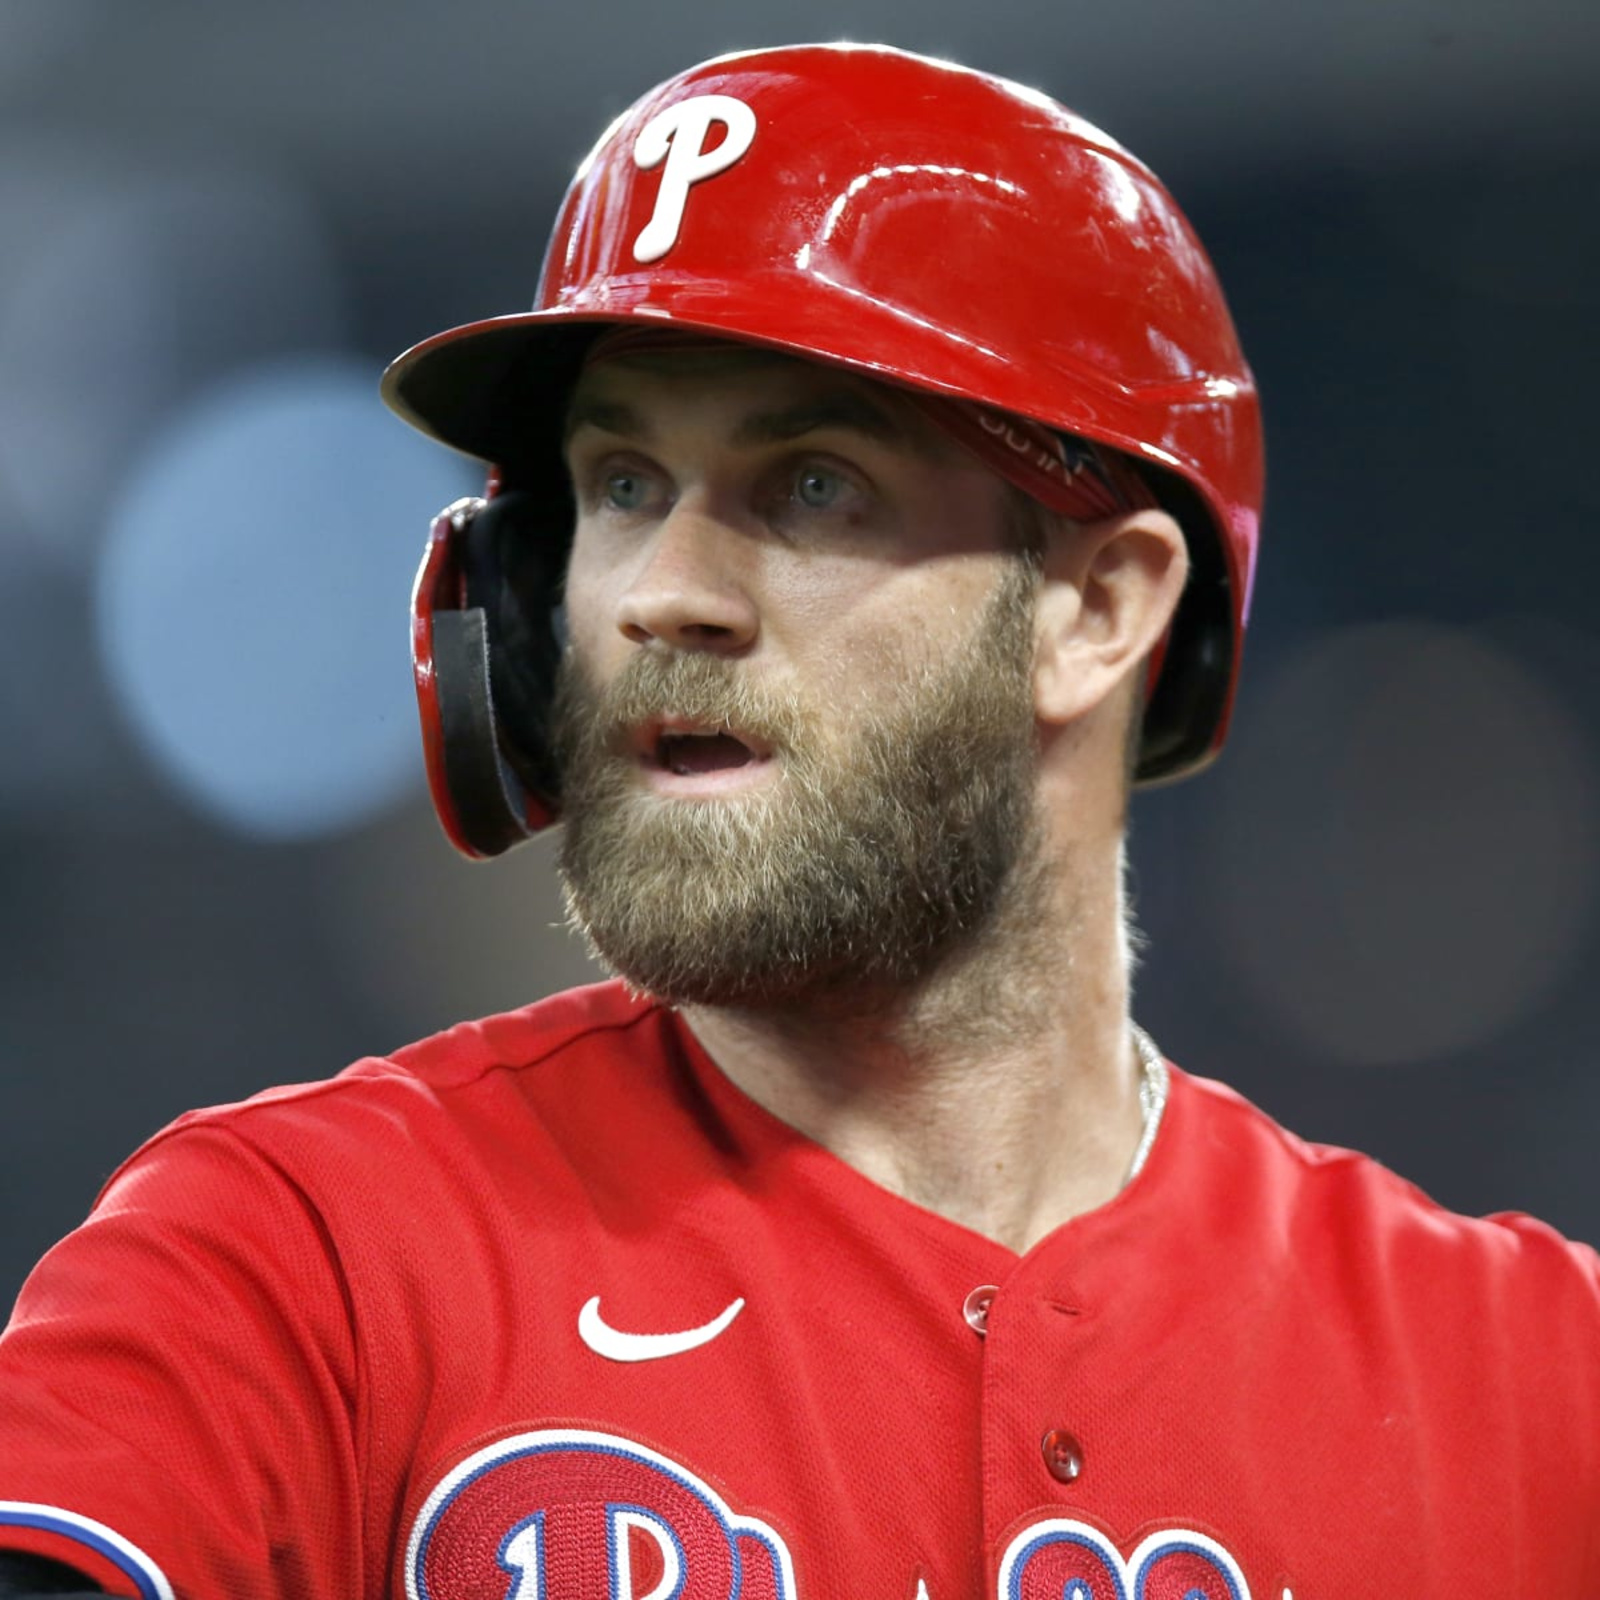 Bryce Harper, the capeless hero who led the Phillies to the World ...